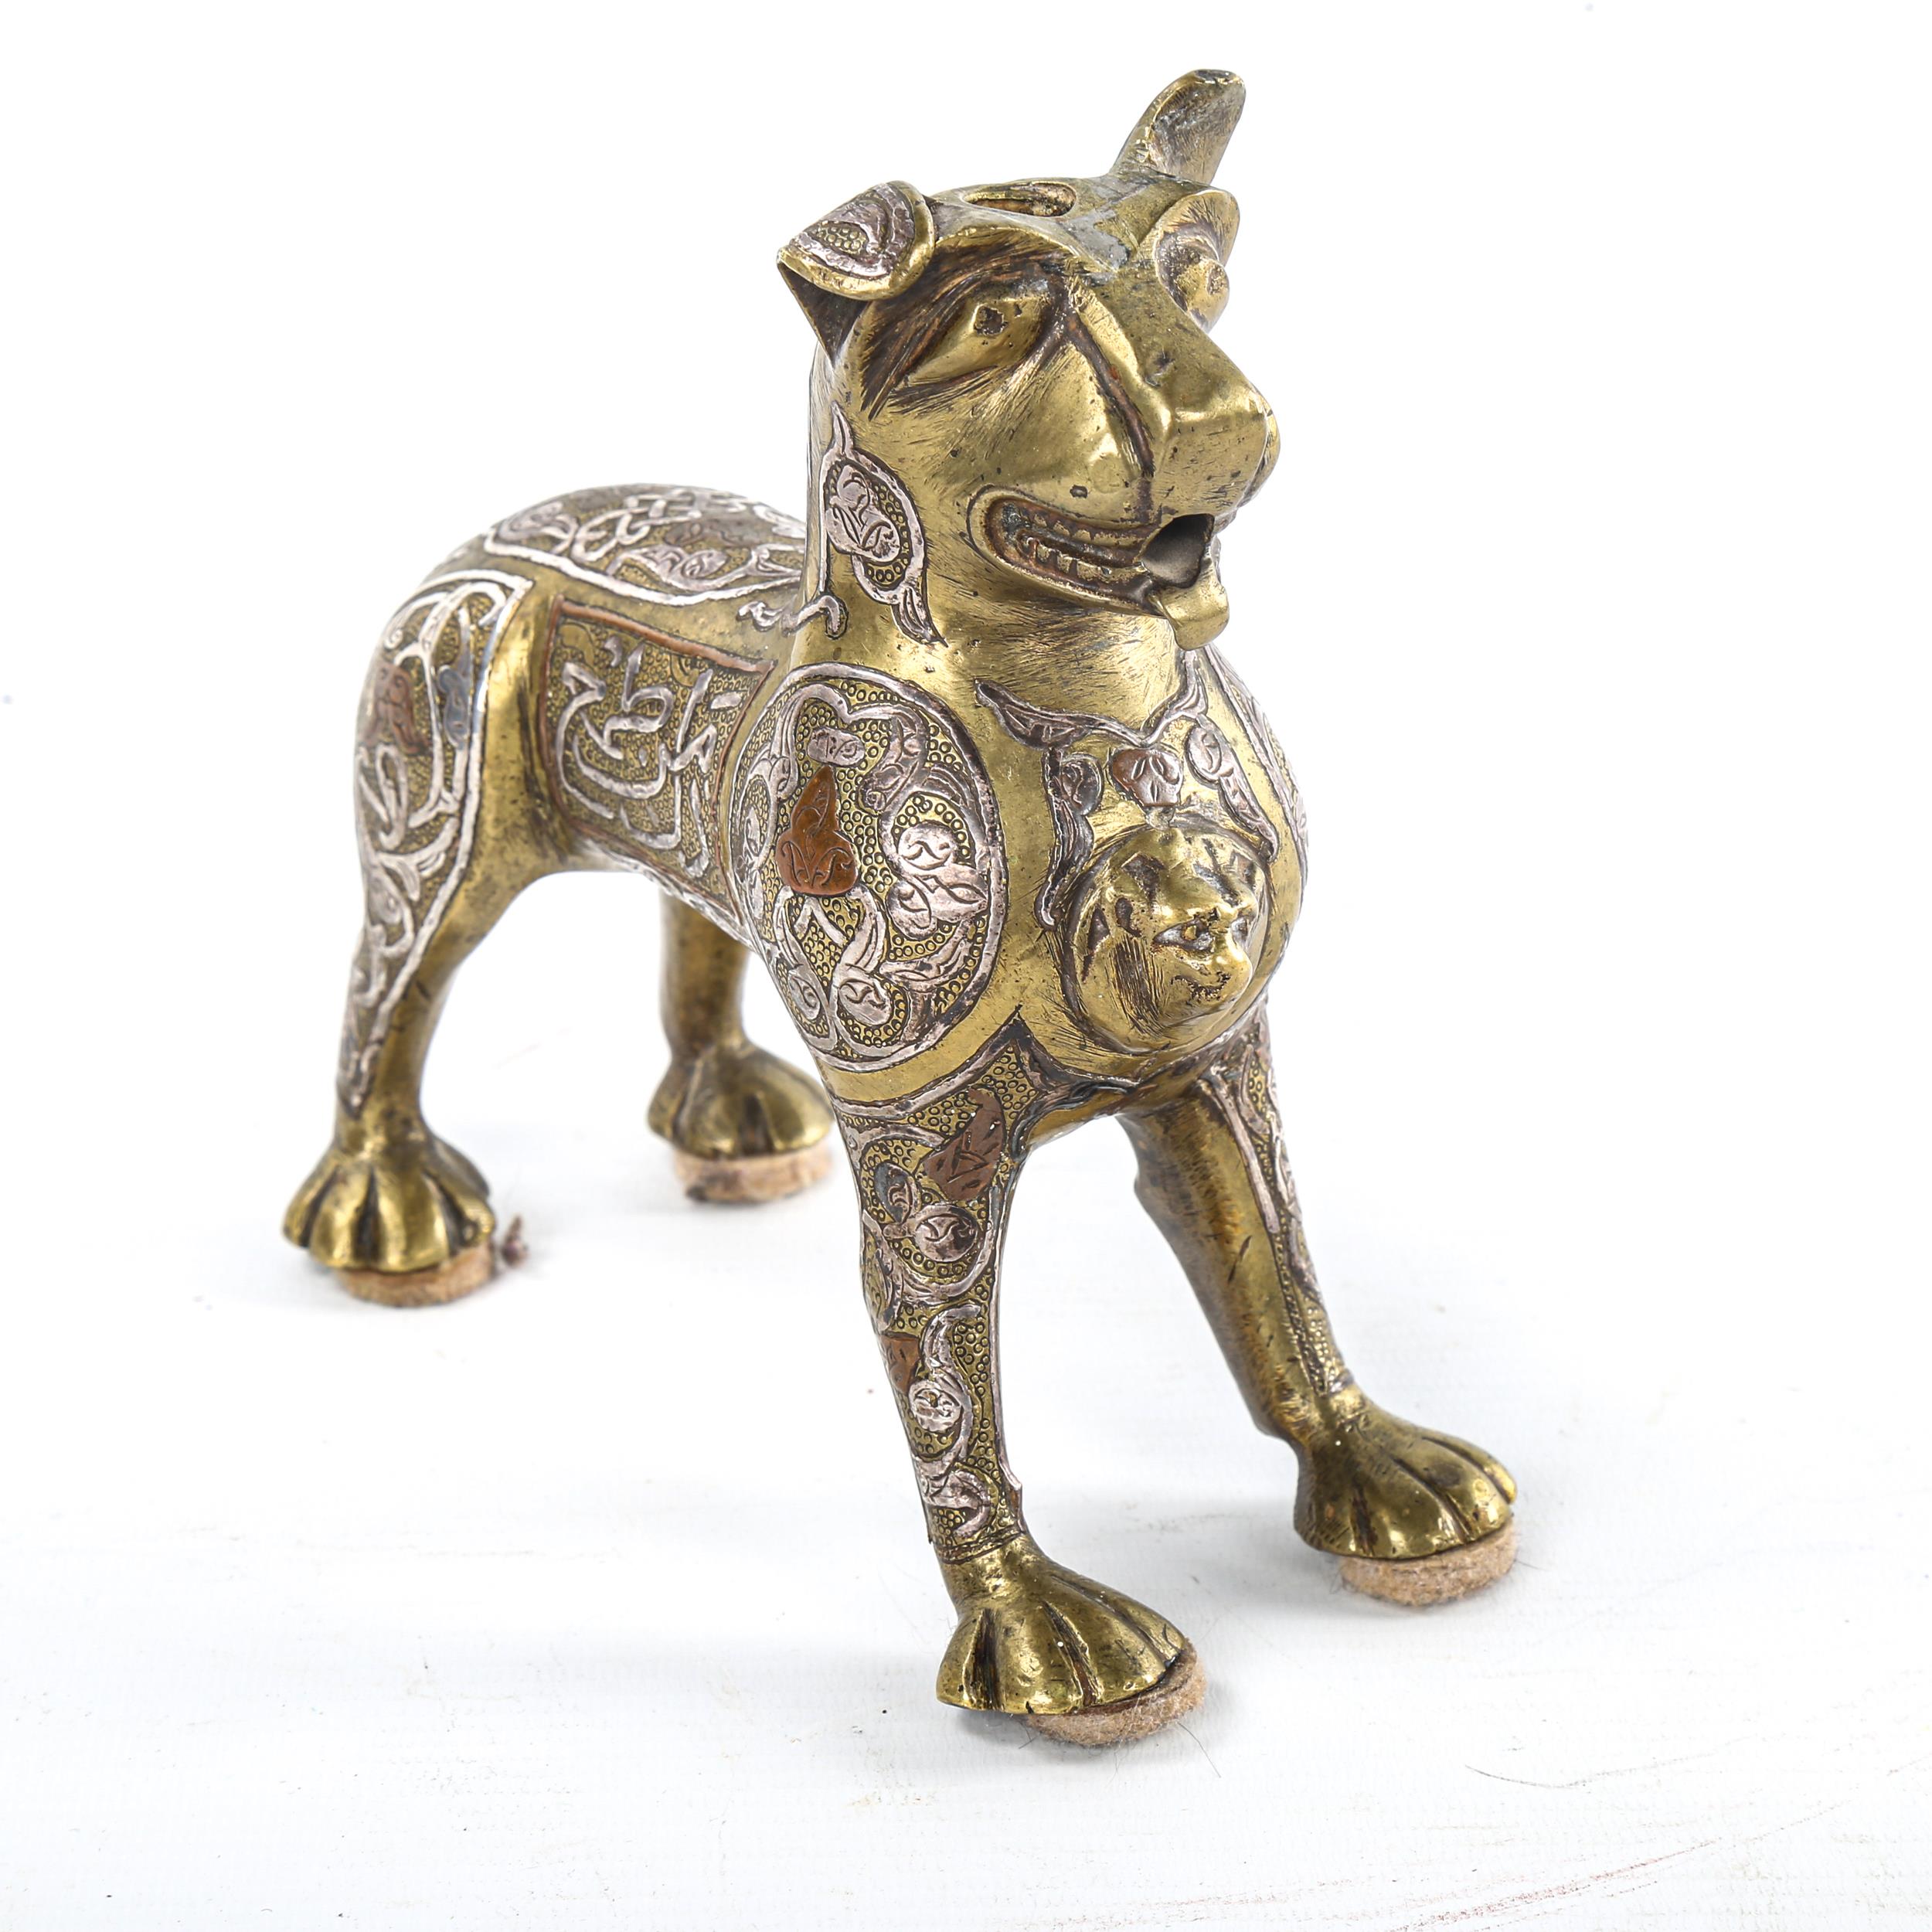 An Islamic bronze standing lion, possibly a lamp base, with inlaid silver and copper decoration - Image 2 of 3